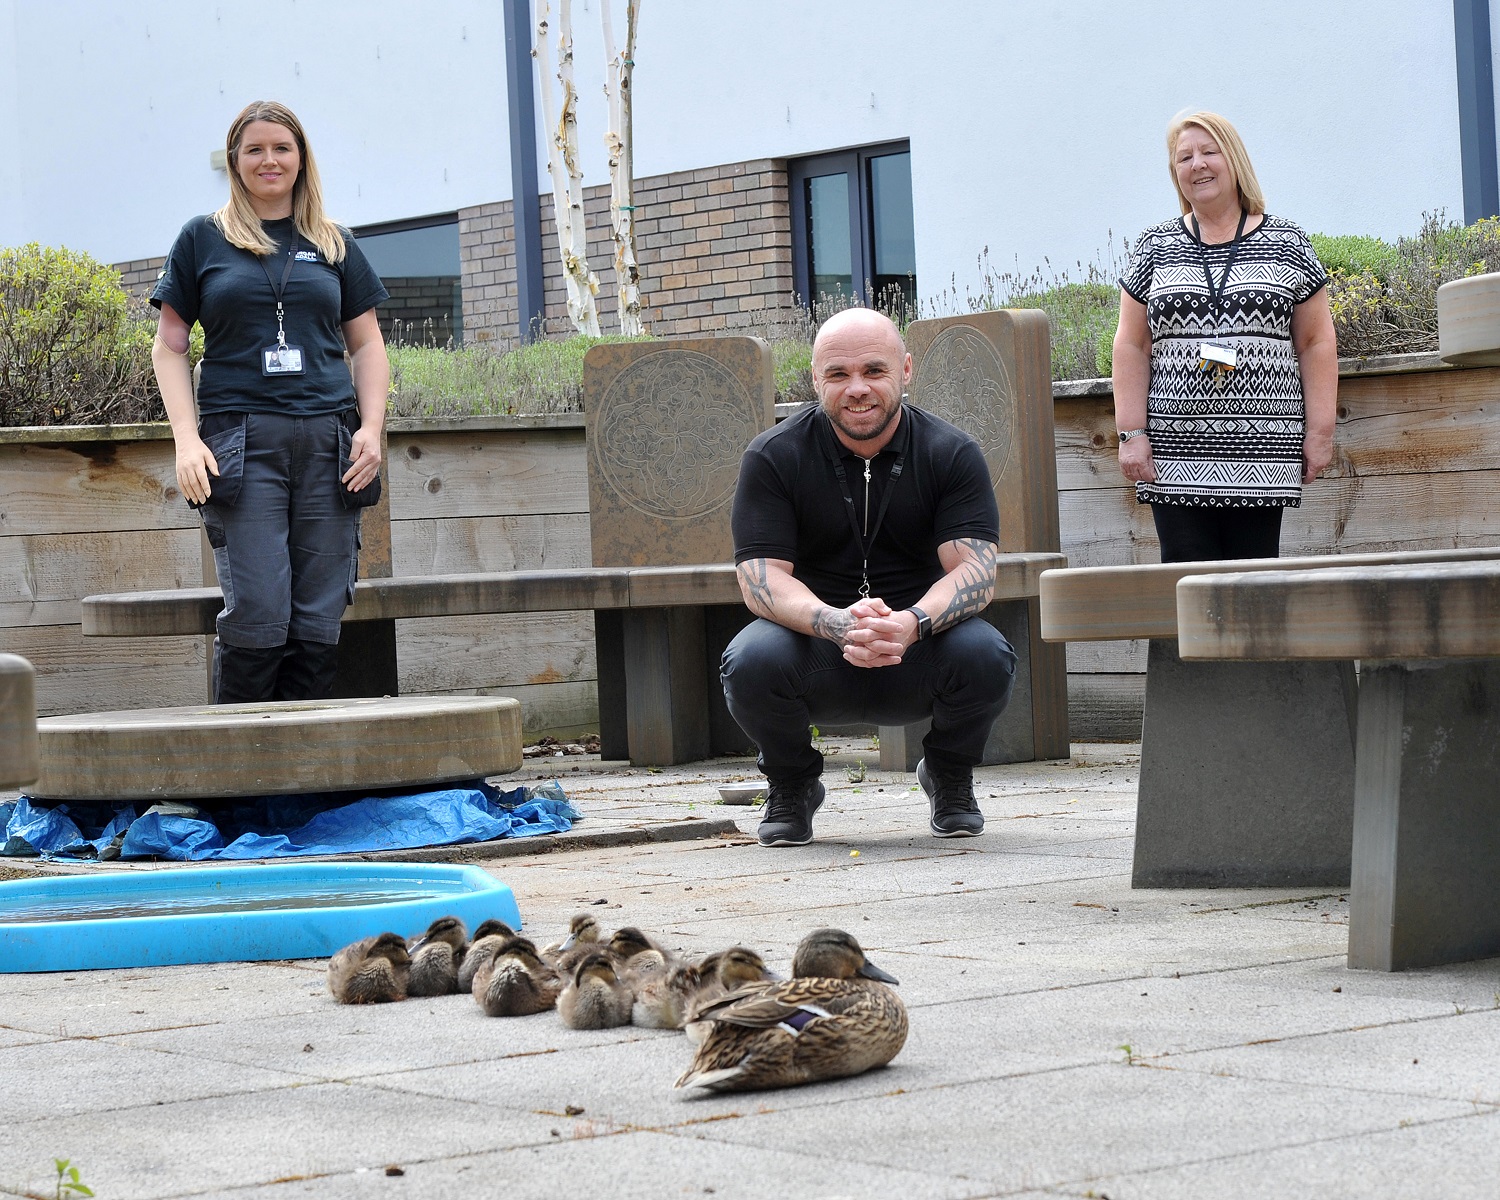 And finally... Hospital team steps in to give stranded ducklings a new home